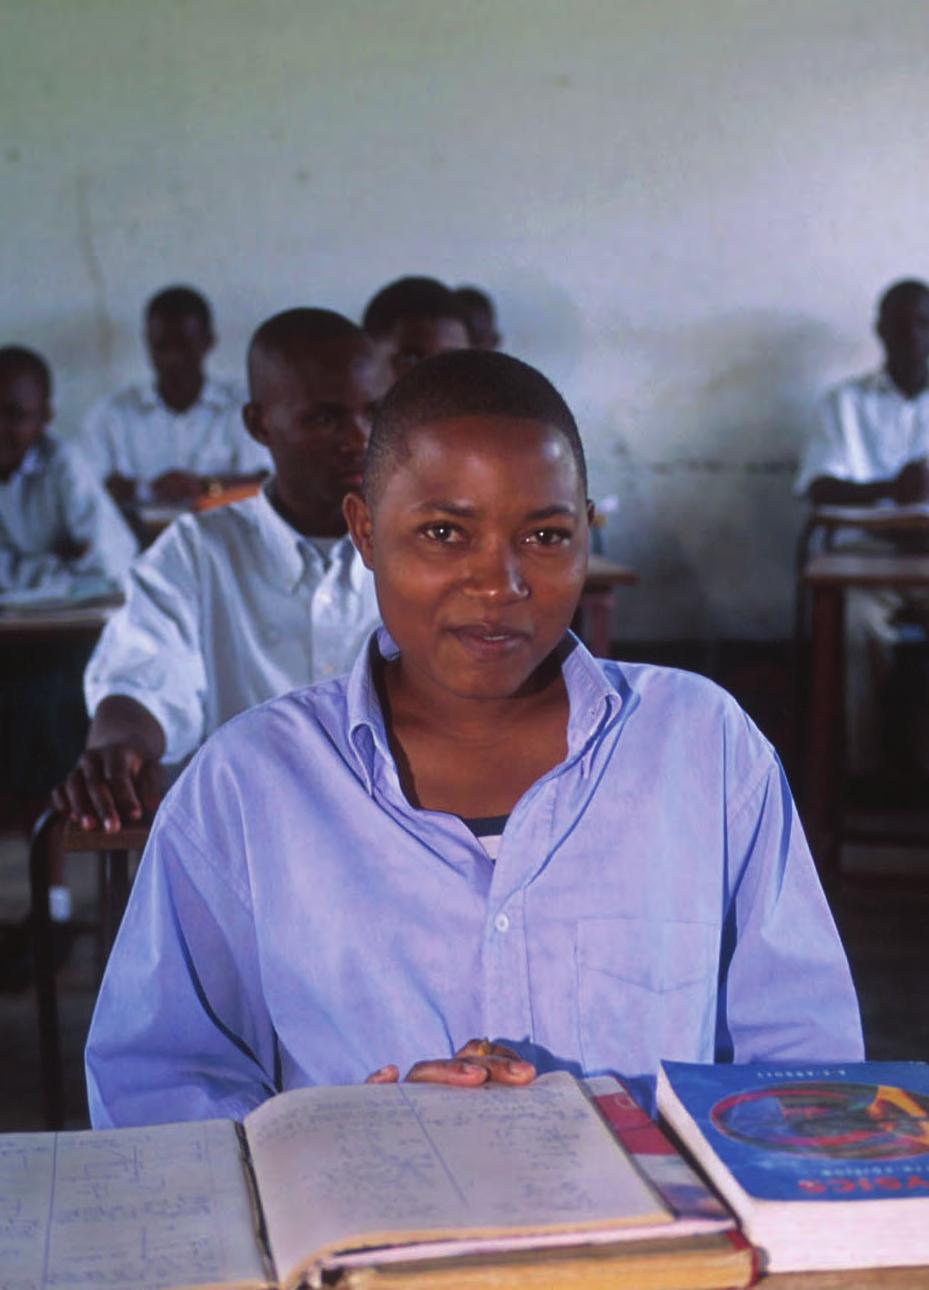 A girl s education is a human right and leads to improved health and nutrition in society